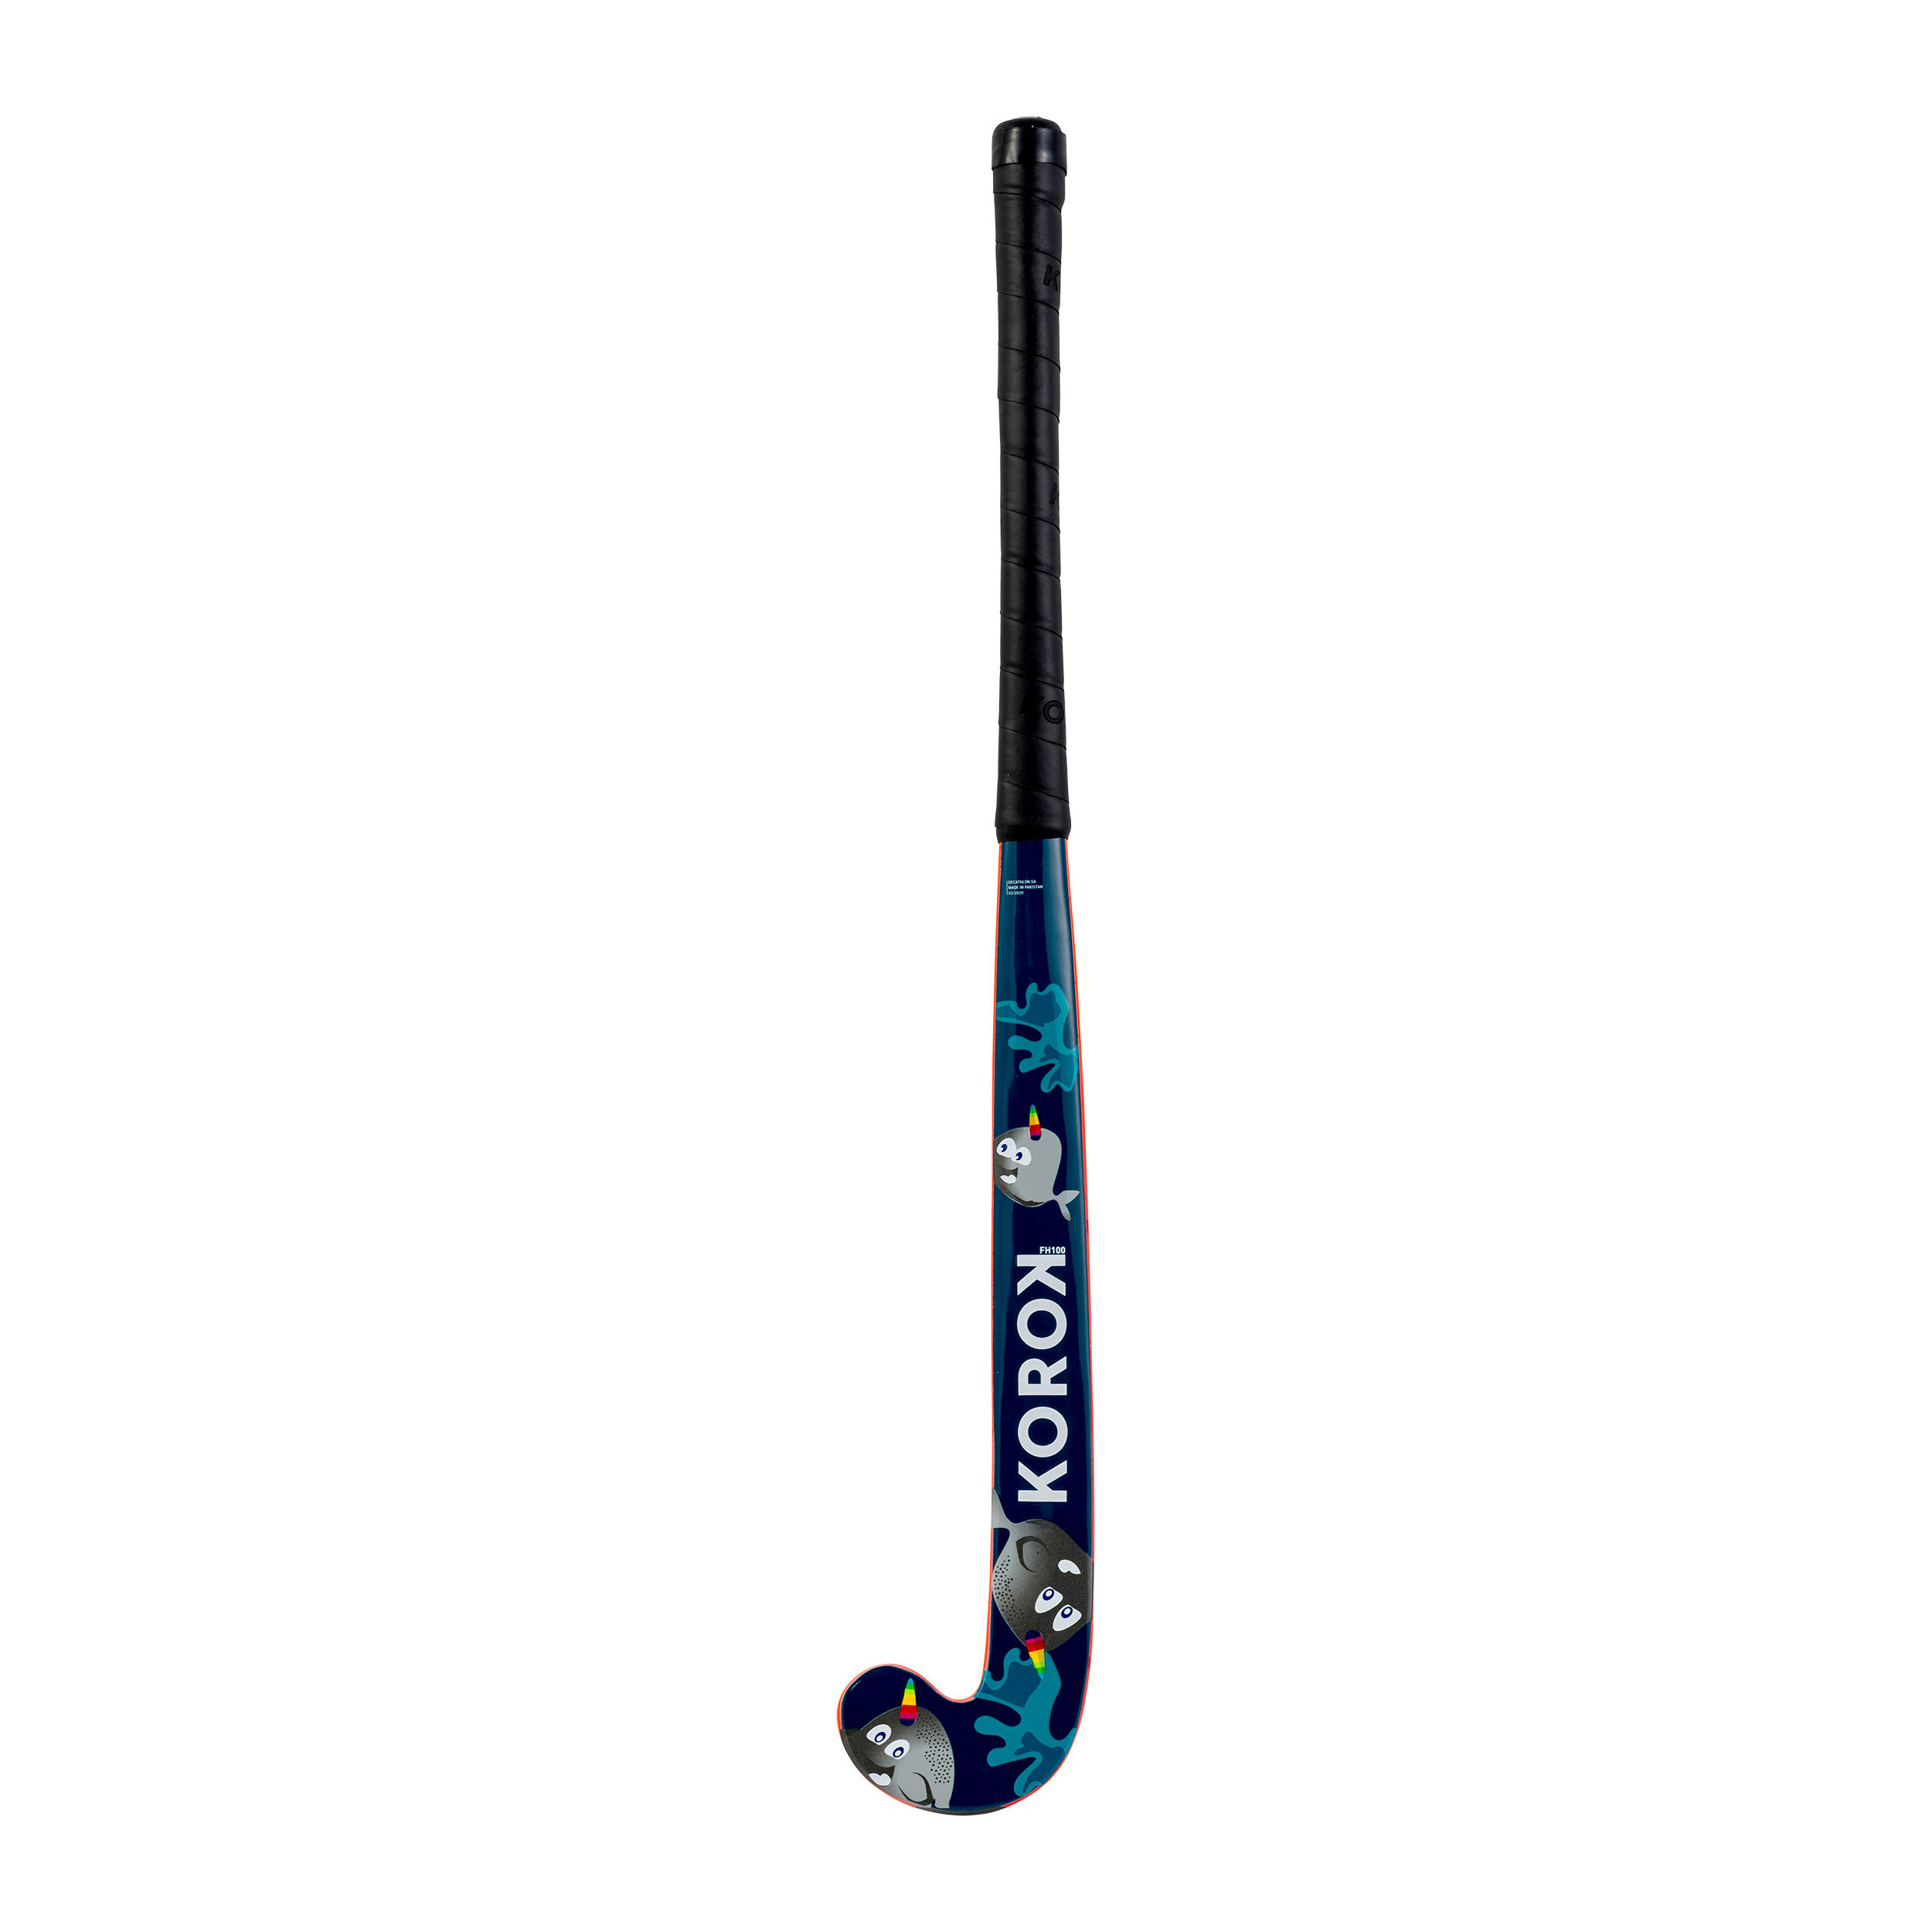 Kids' Wood Field Hockey Stick FH100 - Narwhal 5/11